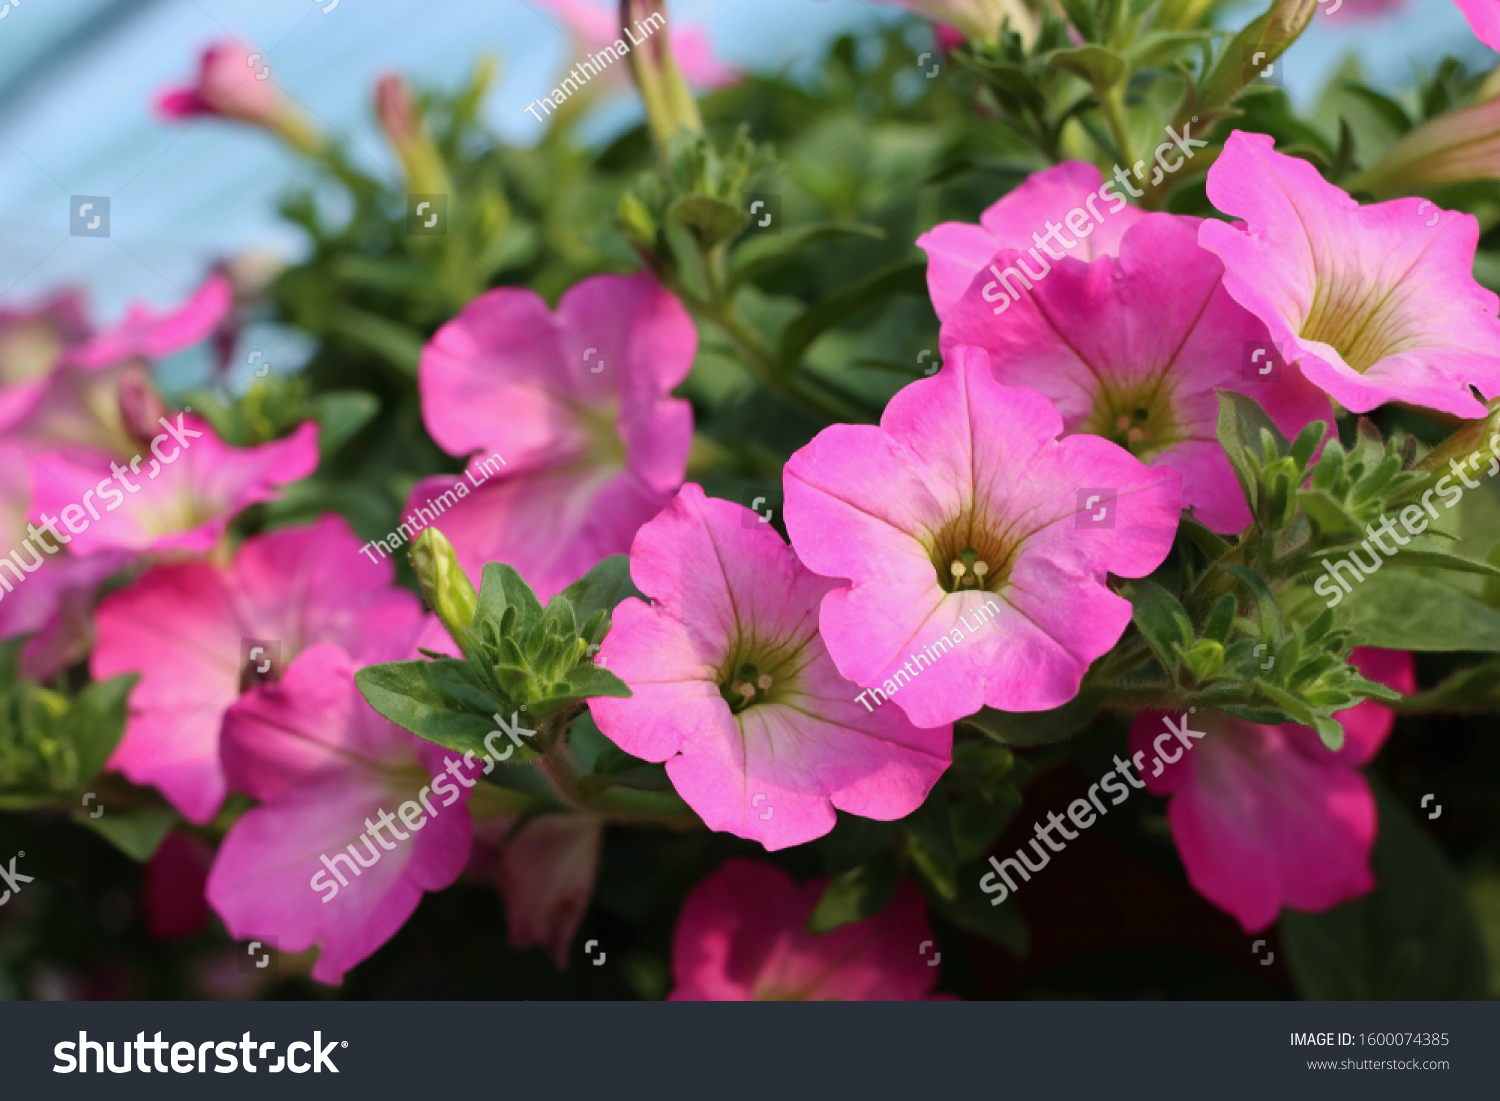 petunia flowers for sale in market #1600074385